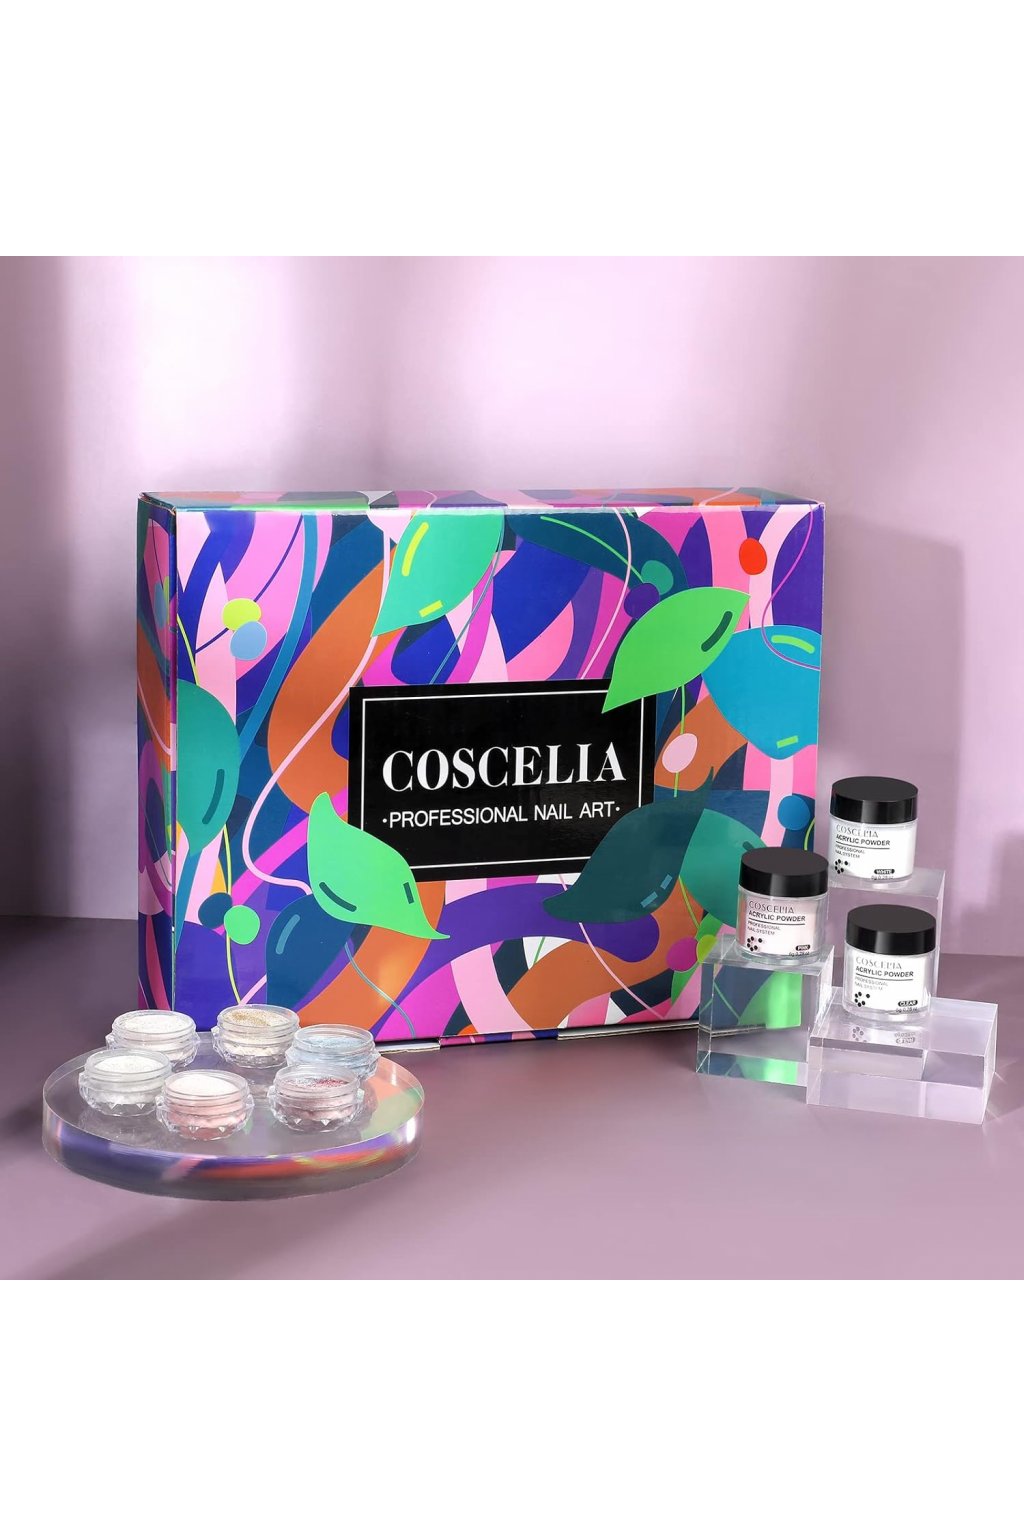 What is Coscelia Professional Nail Art? - wide 4